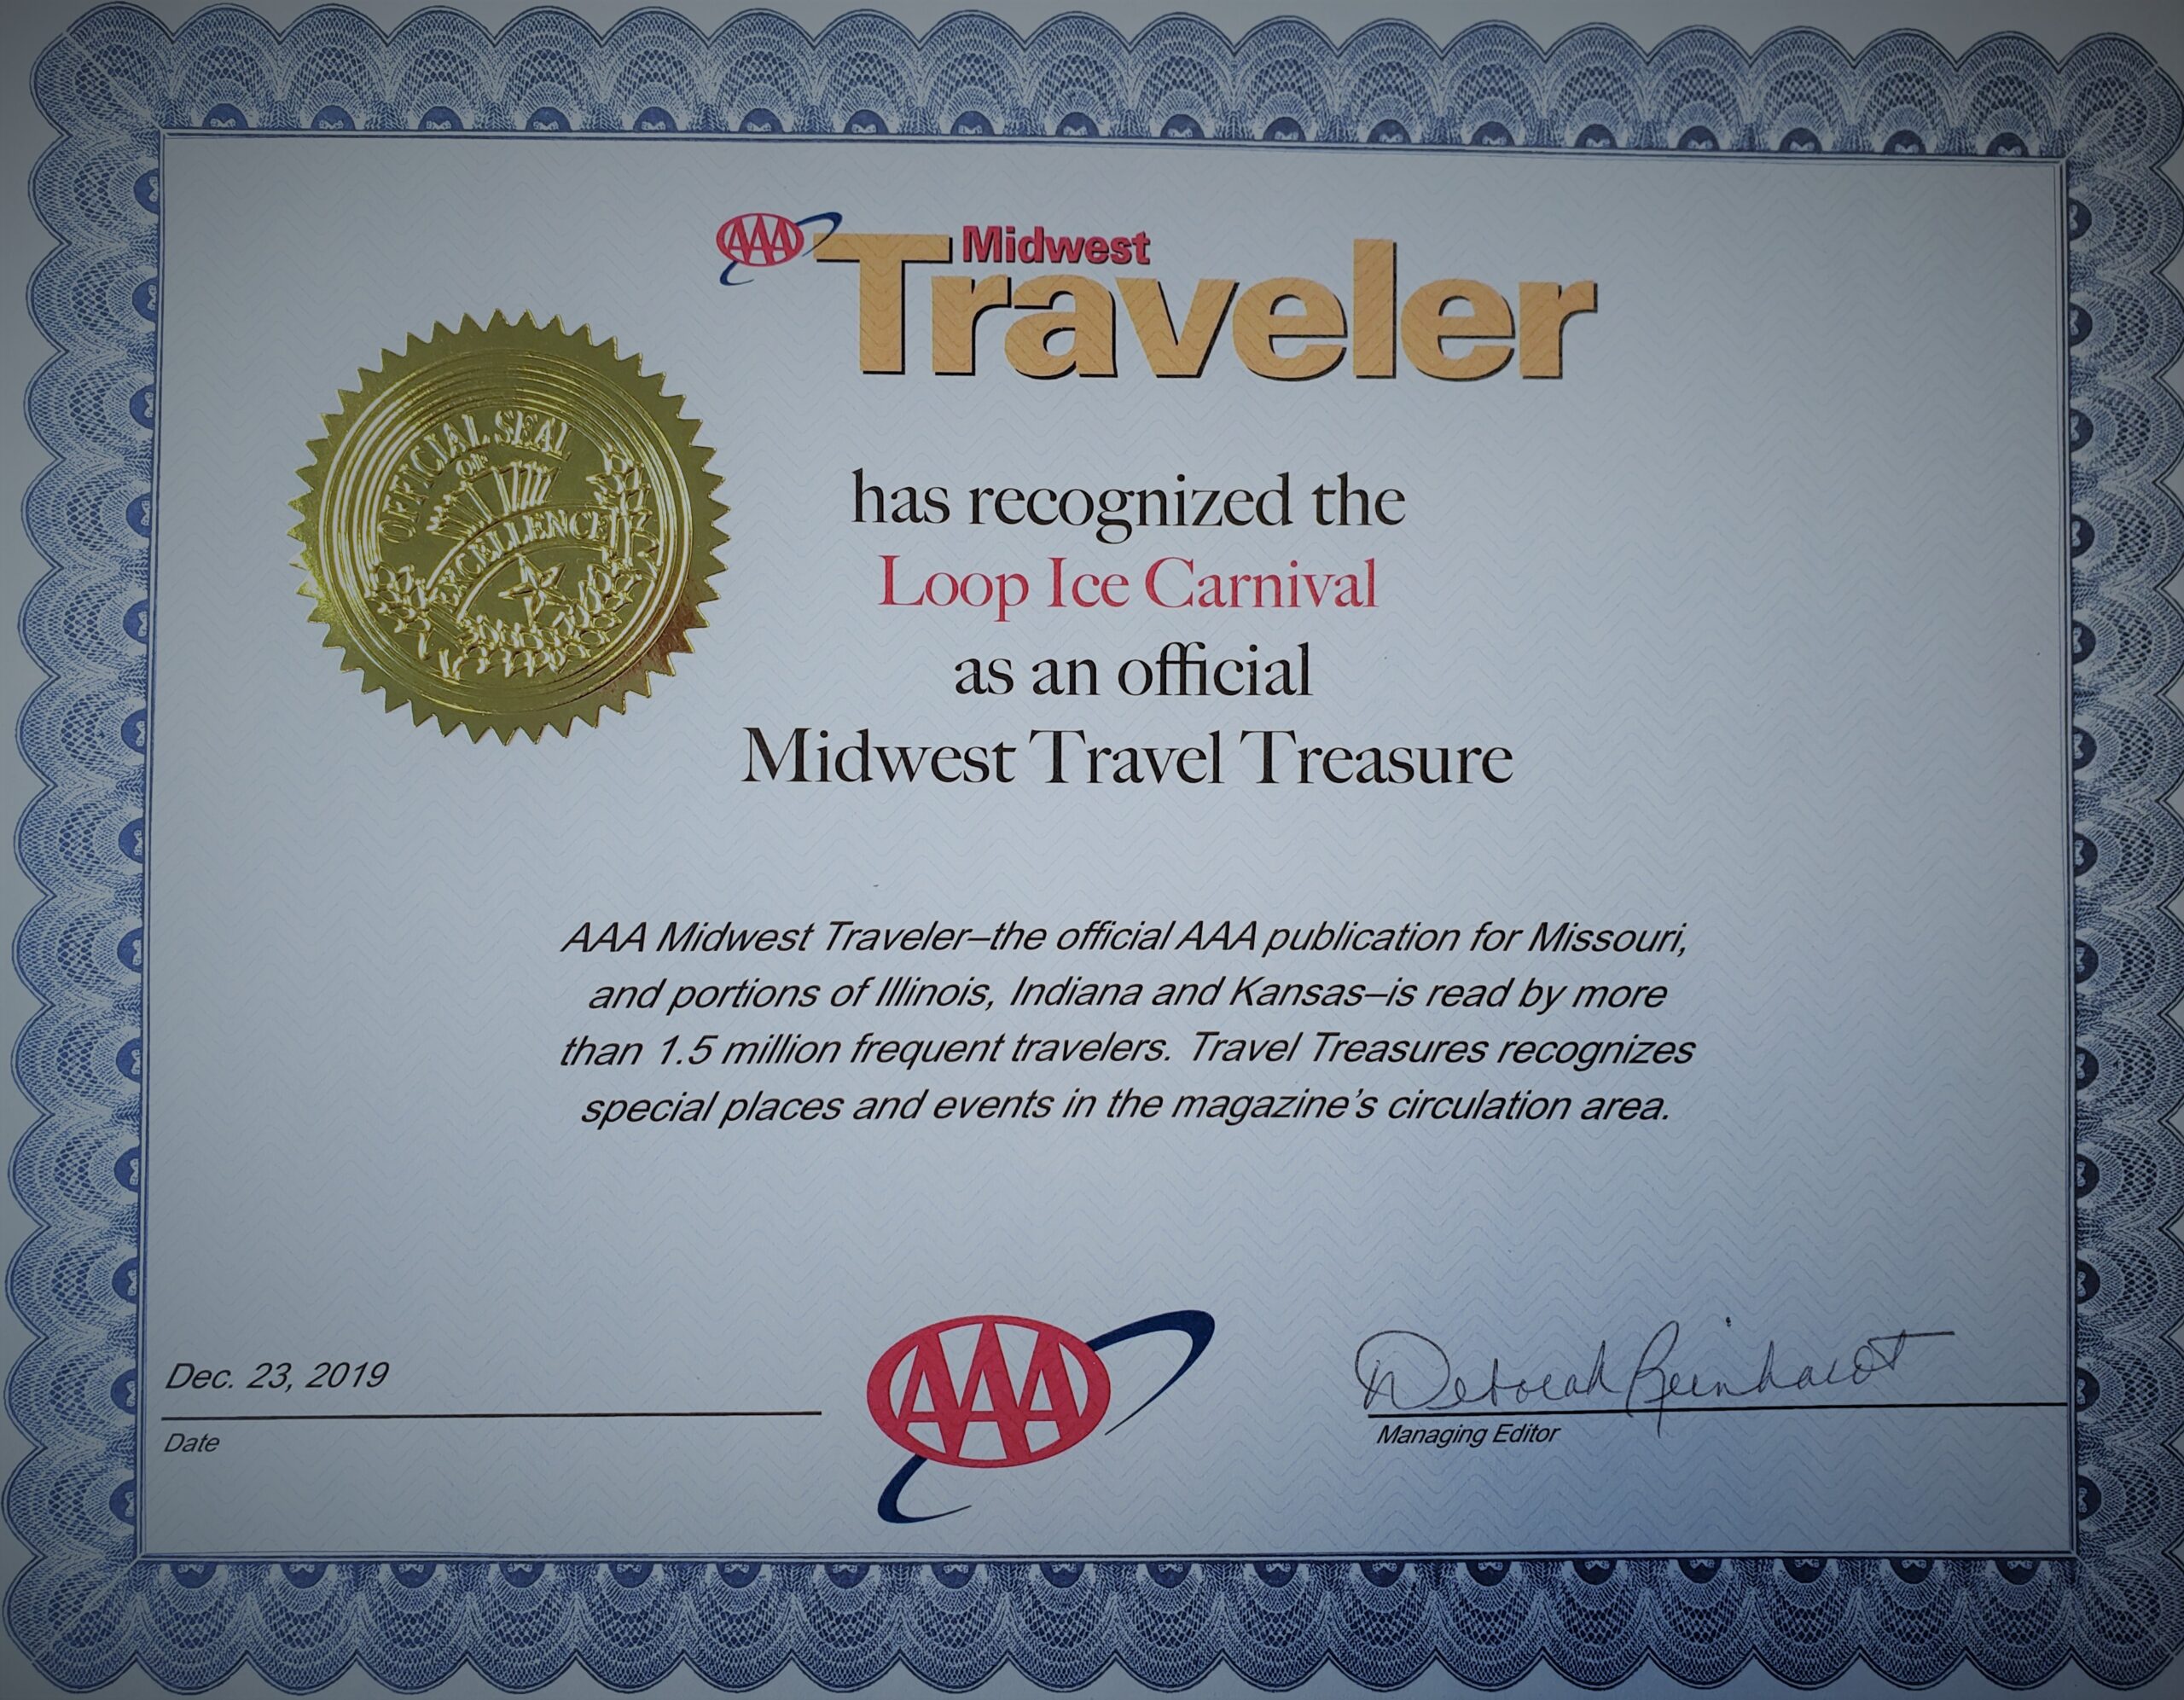 Loop Ice Carnival Recognized as an official Midwest Travel Treasure